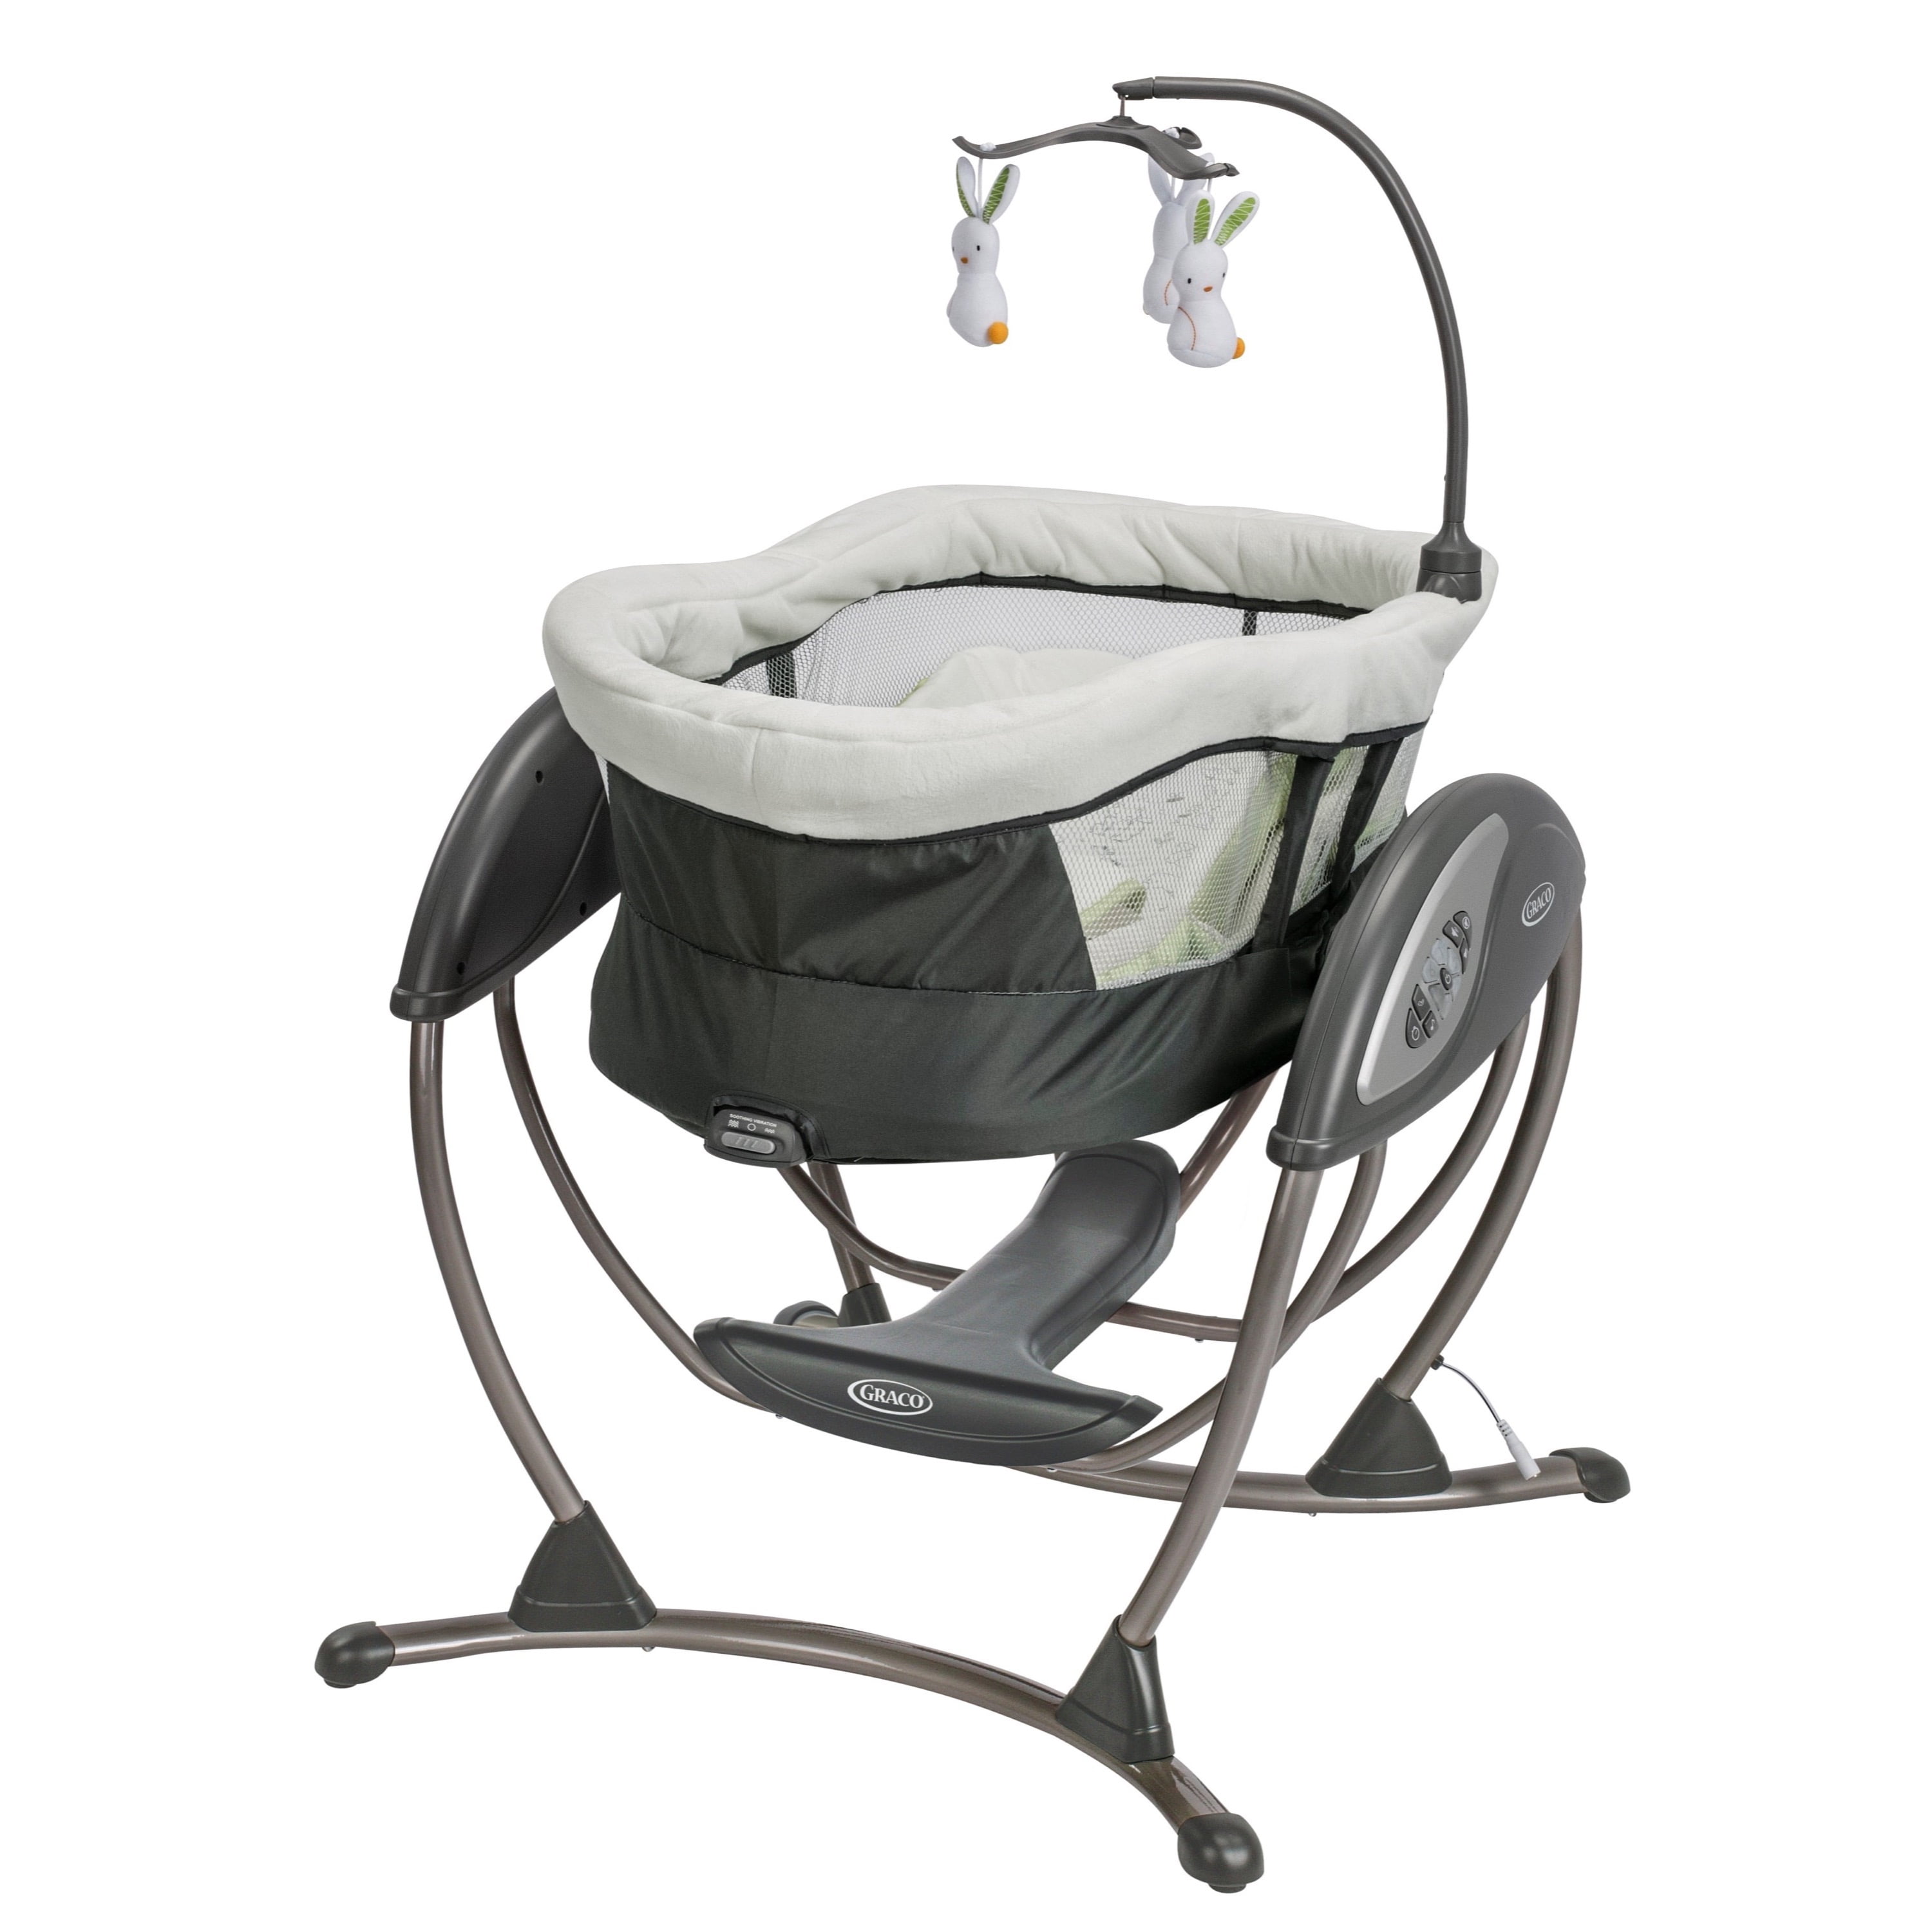 graco baby swing age limit